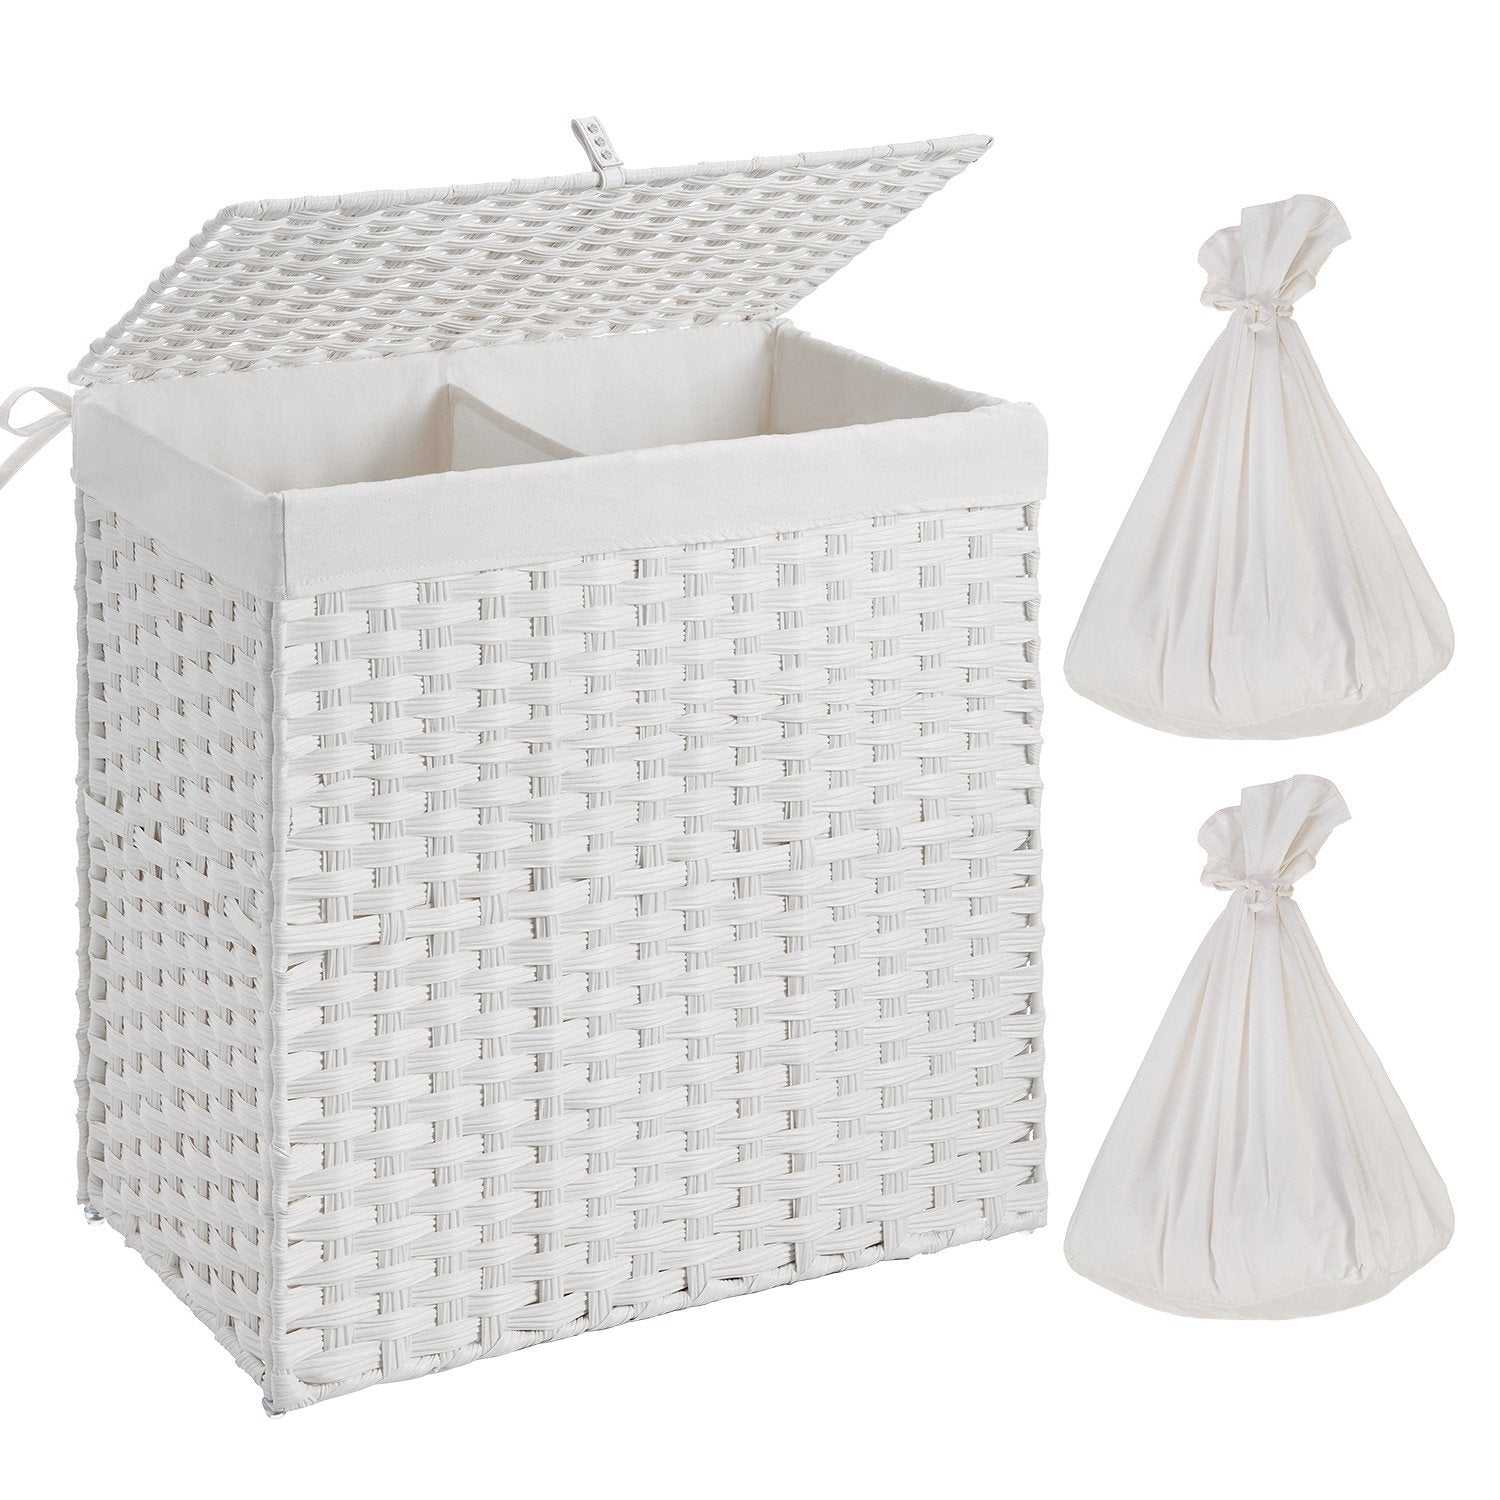 Handwoven Synthetic Rattan Collapsible Laundry Hamper with Lid